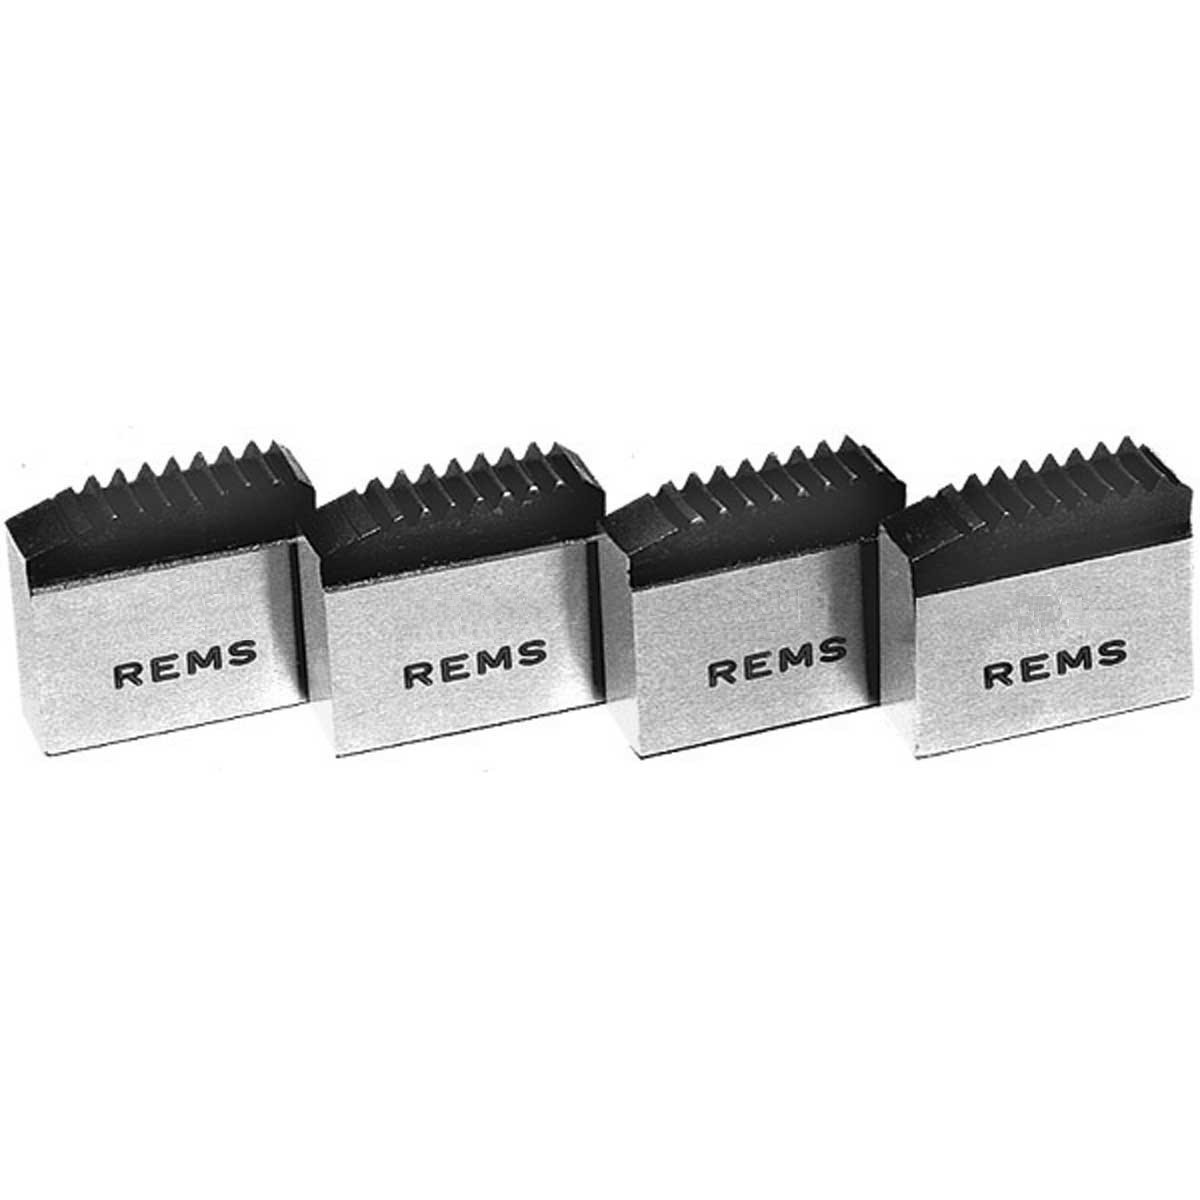 REMS - 1/4" Replacement Die Set, 521212